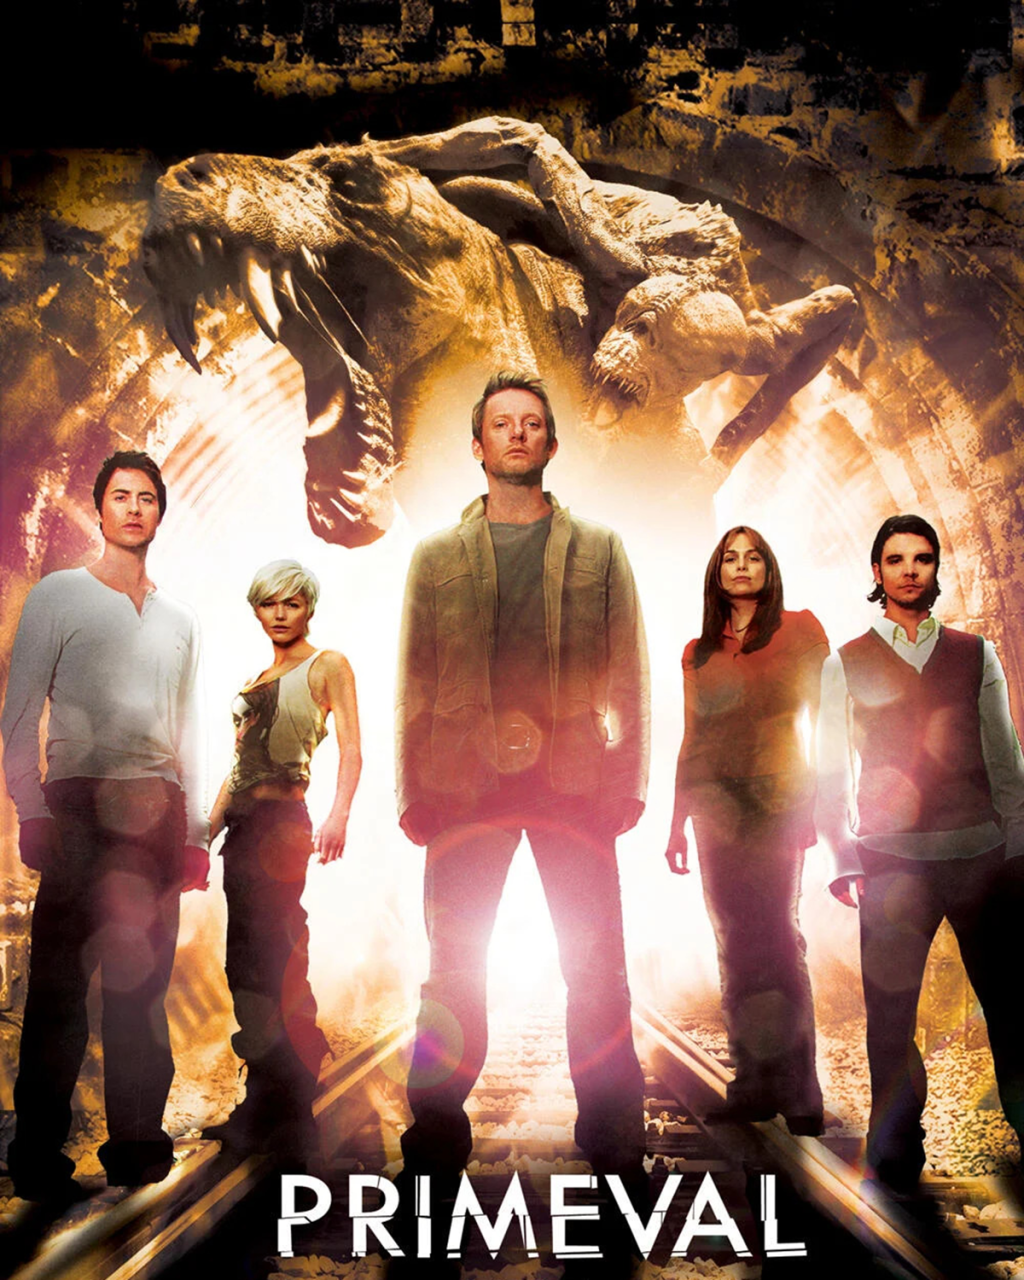 Primeval (ITV/Impossible Pictures, 2007-11).